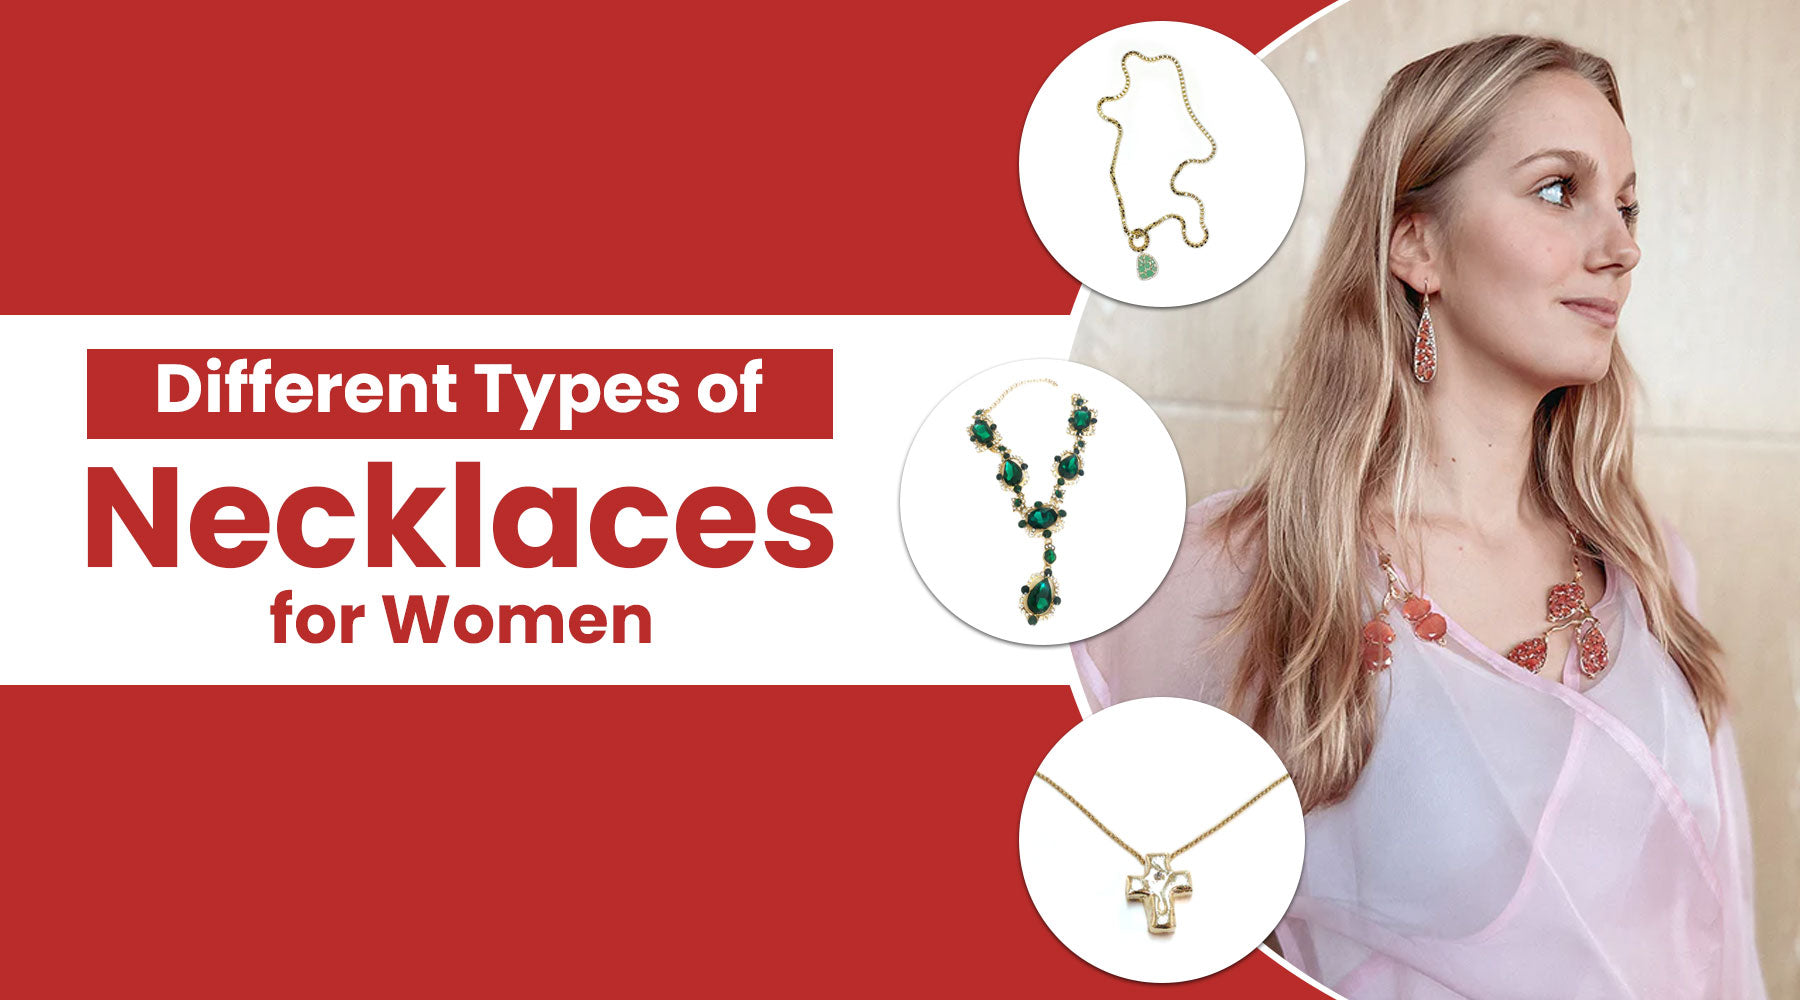 Different Types of Necklaces for Women